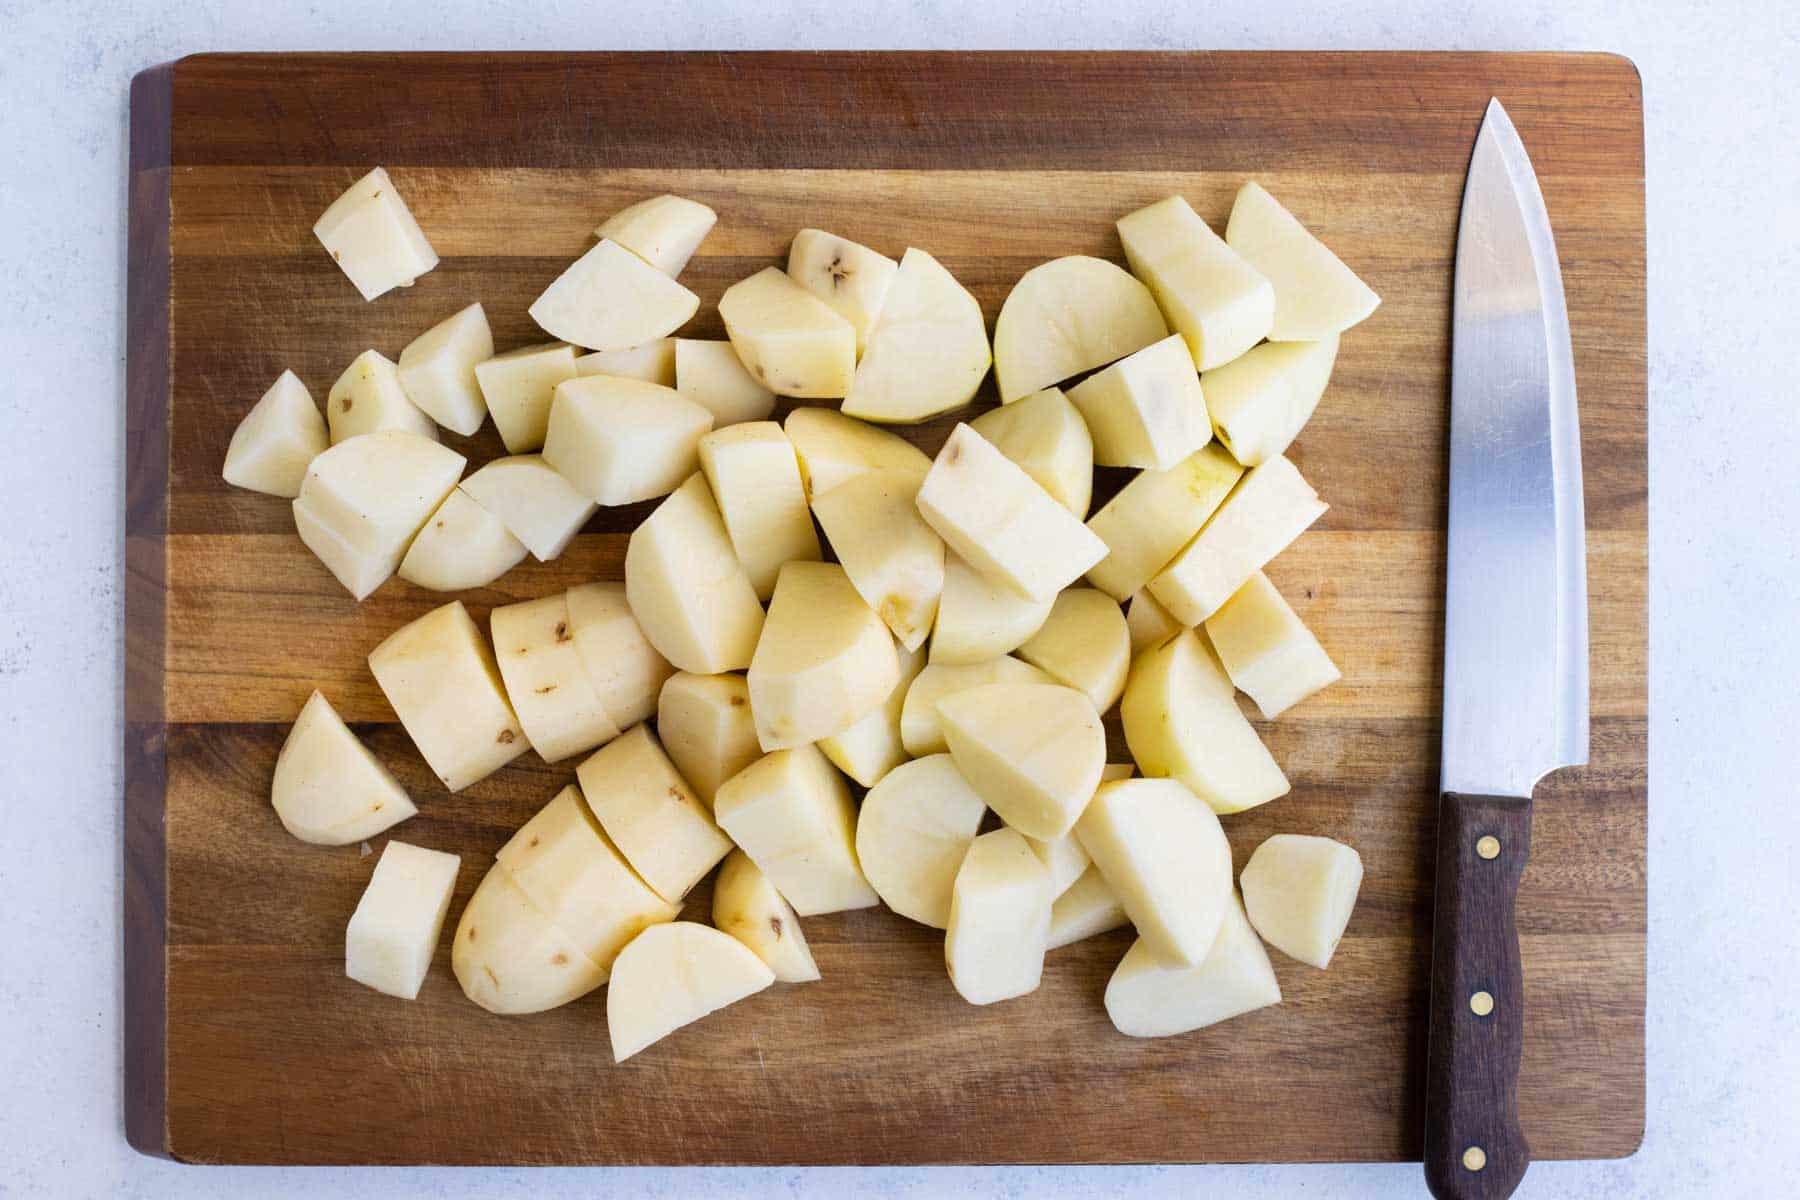 Potatoes are chopped into 1-inch cubes.